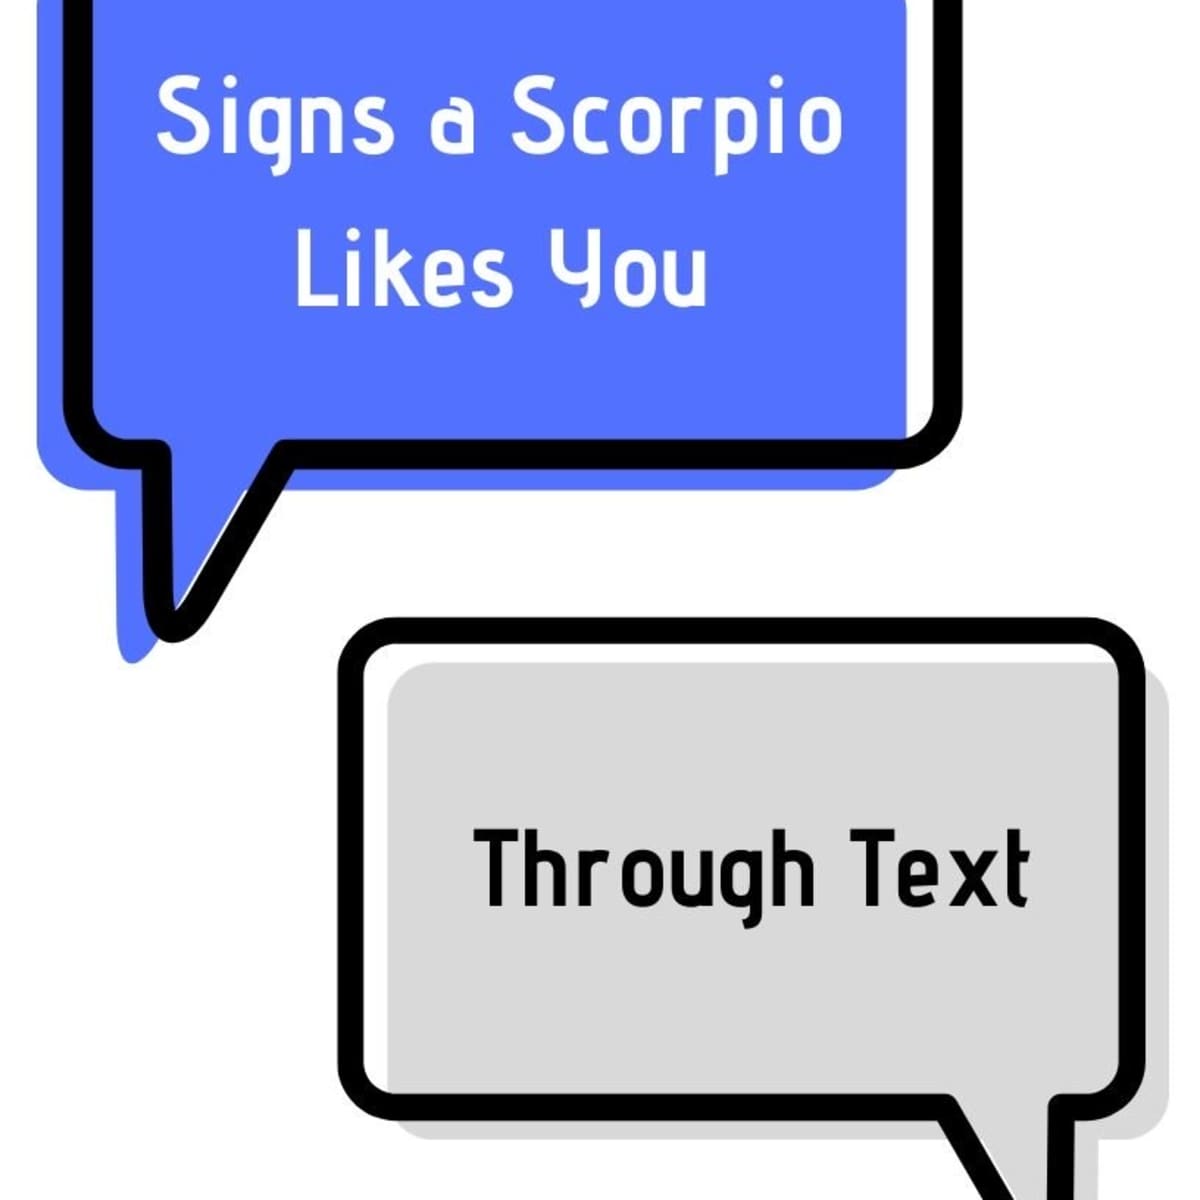 What to do when scorpio woman ignores you